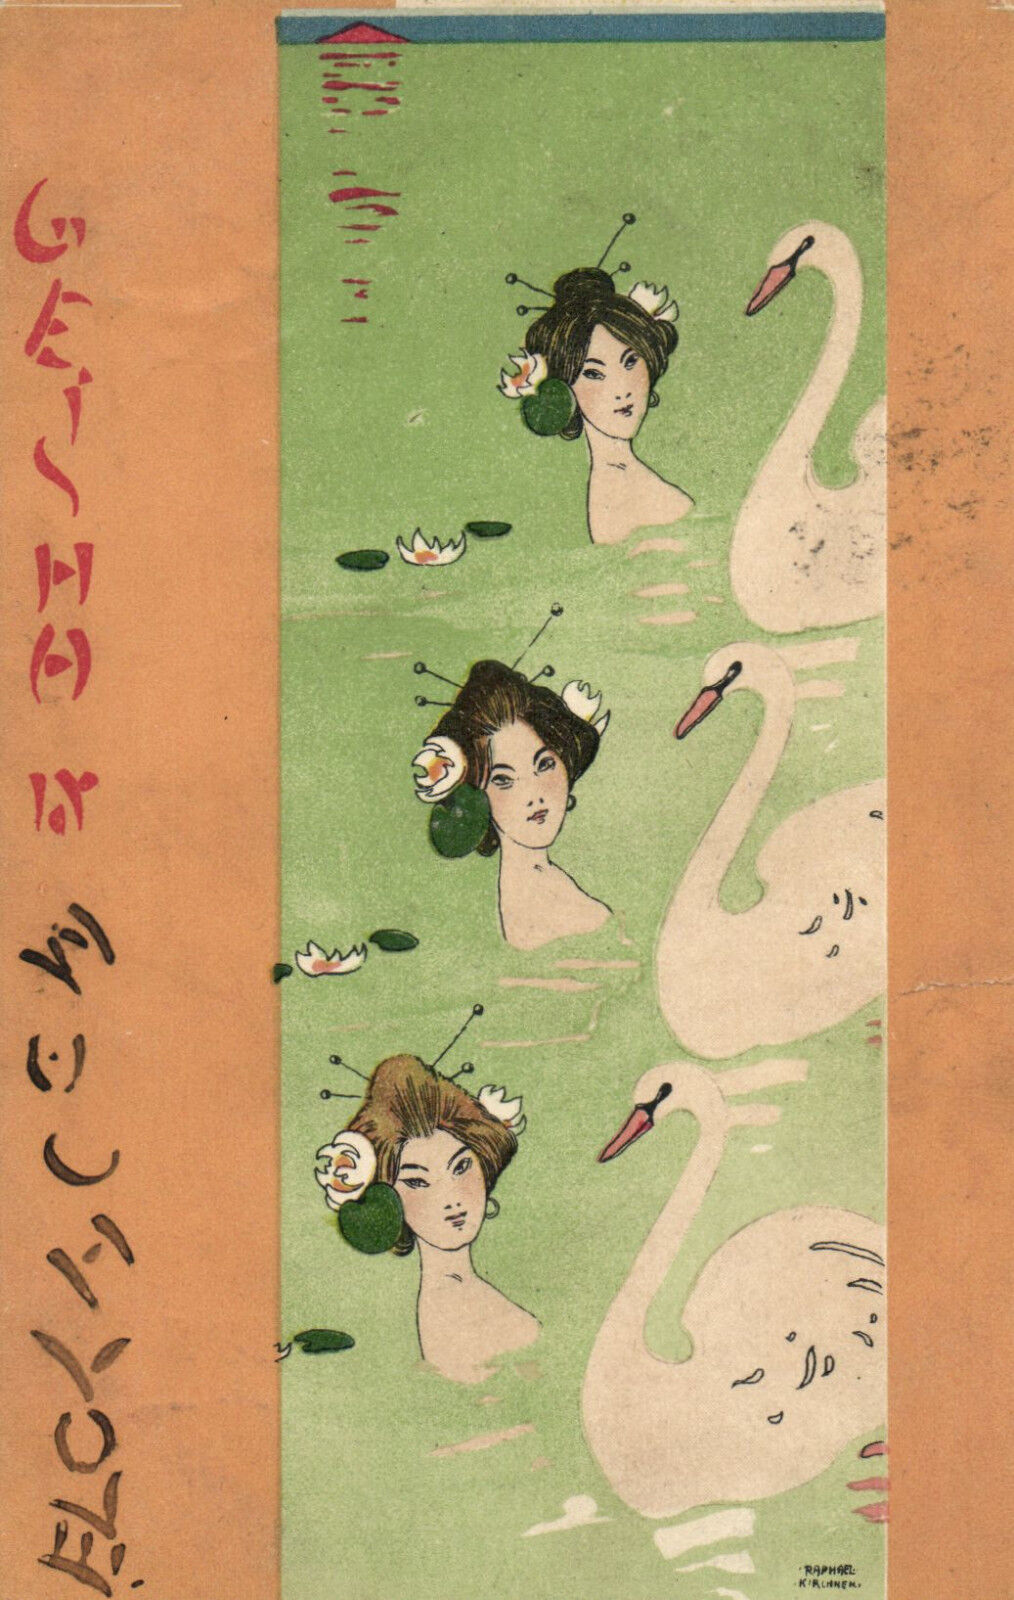 PC CPA KIRCHNER, ARTIST SIGNED, GEISHAS WITH SWANS, ART NOUVEAU, D8/1-9 (b6348)